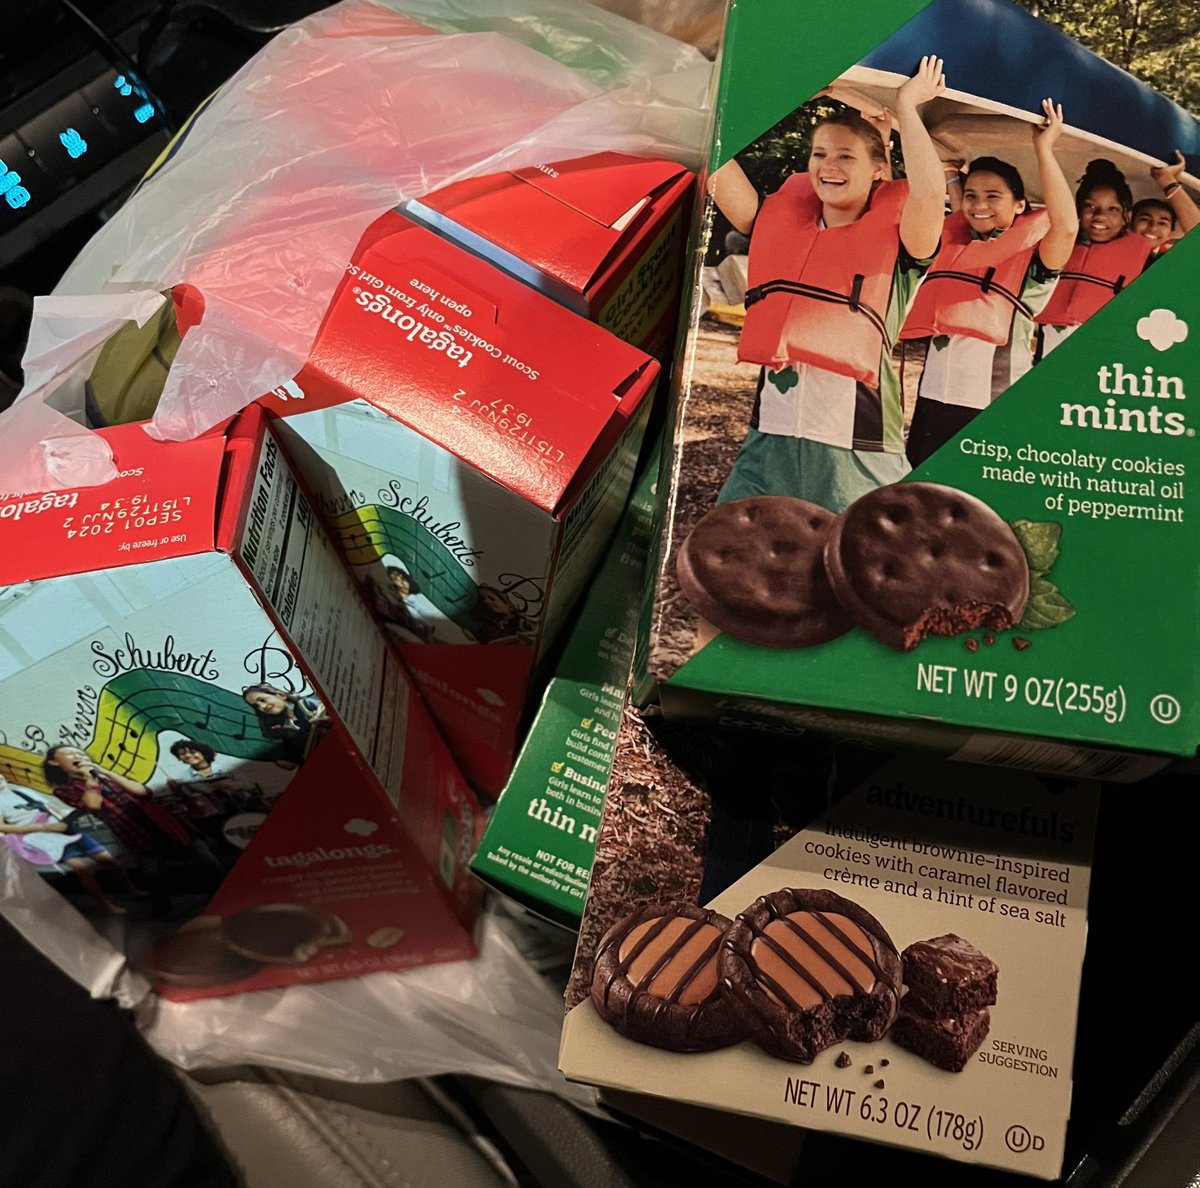 The Girl Scouts are strategically setup at the grocery store I frequent. I think I have reached Presenting Sponsor level! And yet, I haven’t had any. Given them all away 🤠.